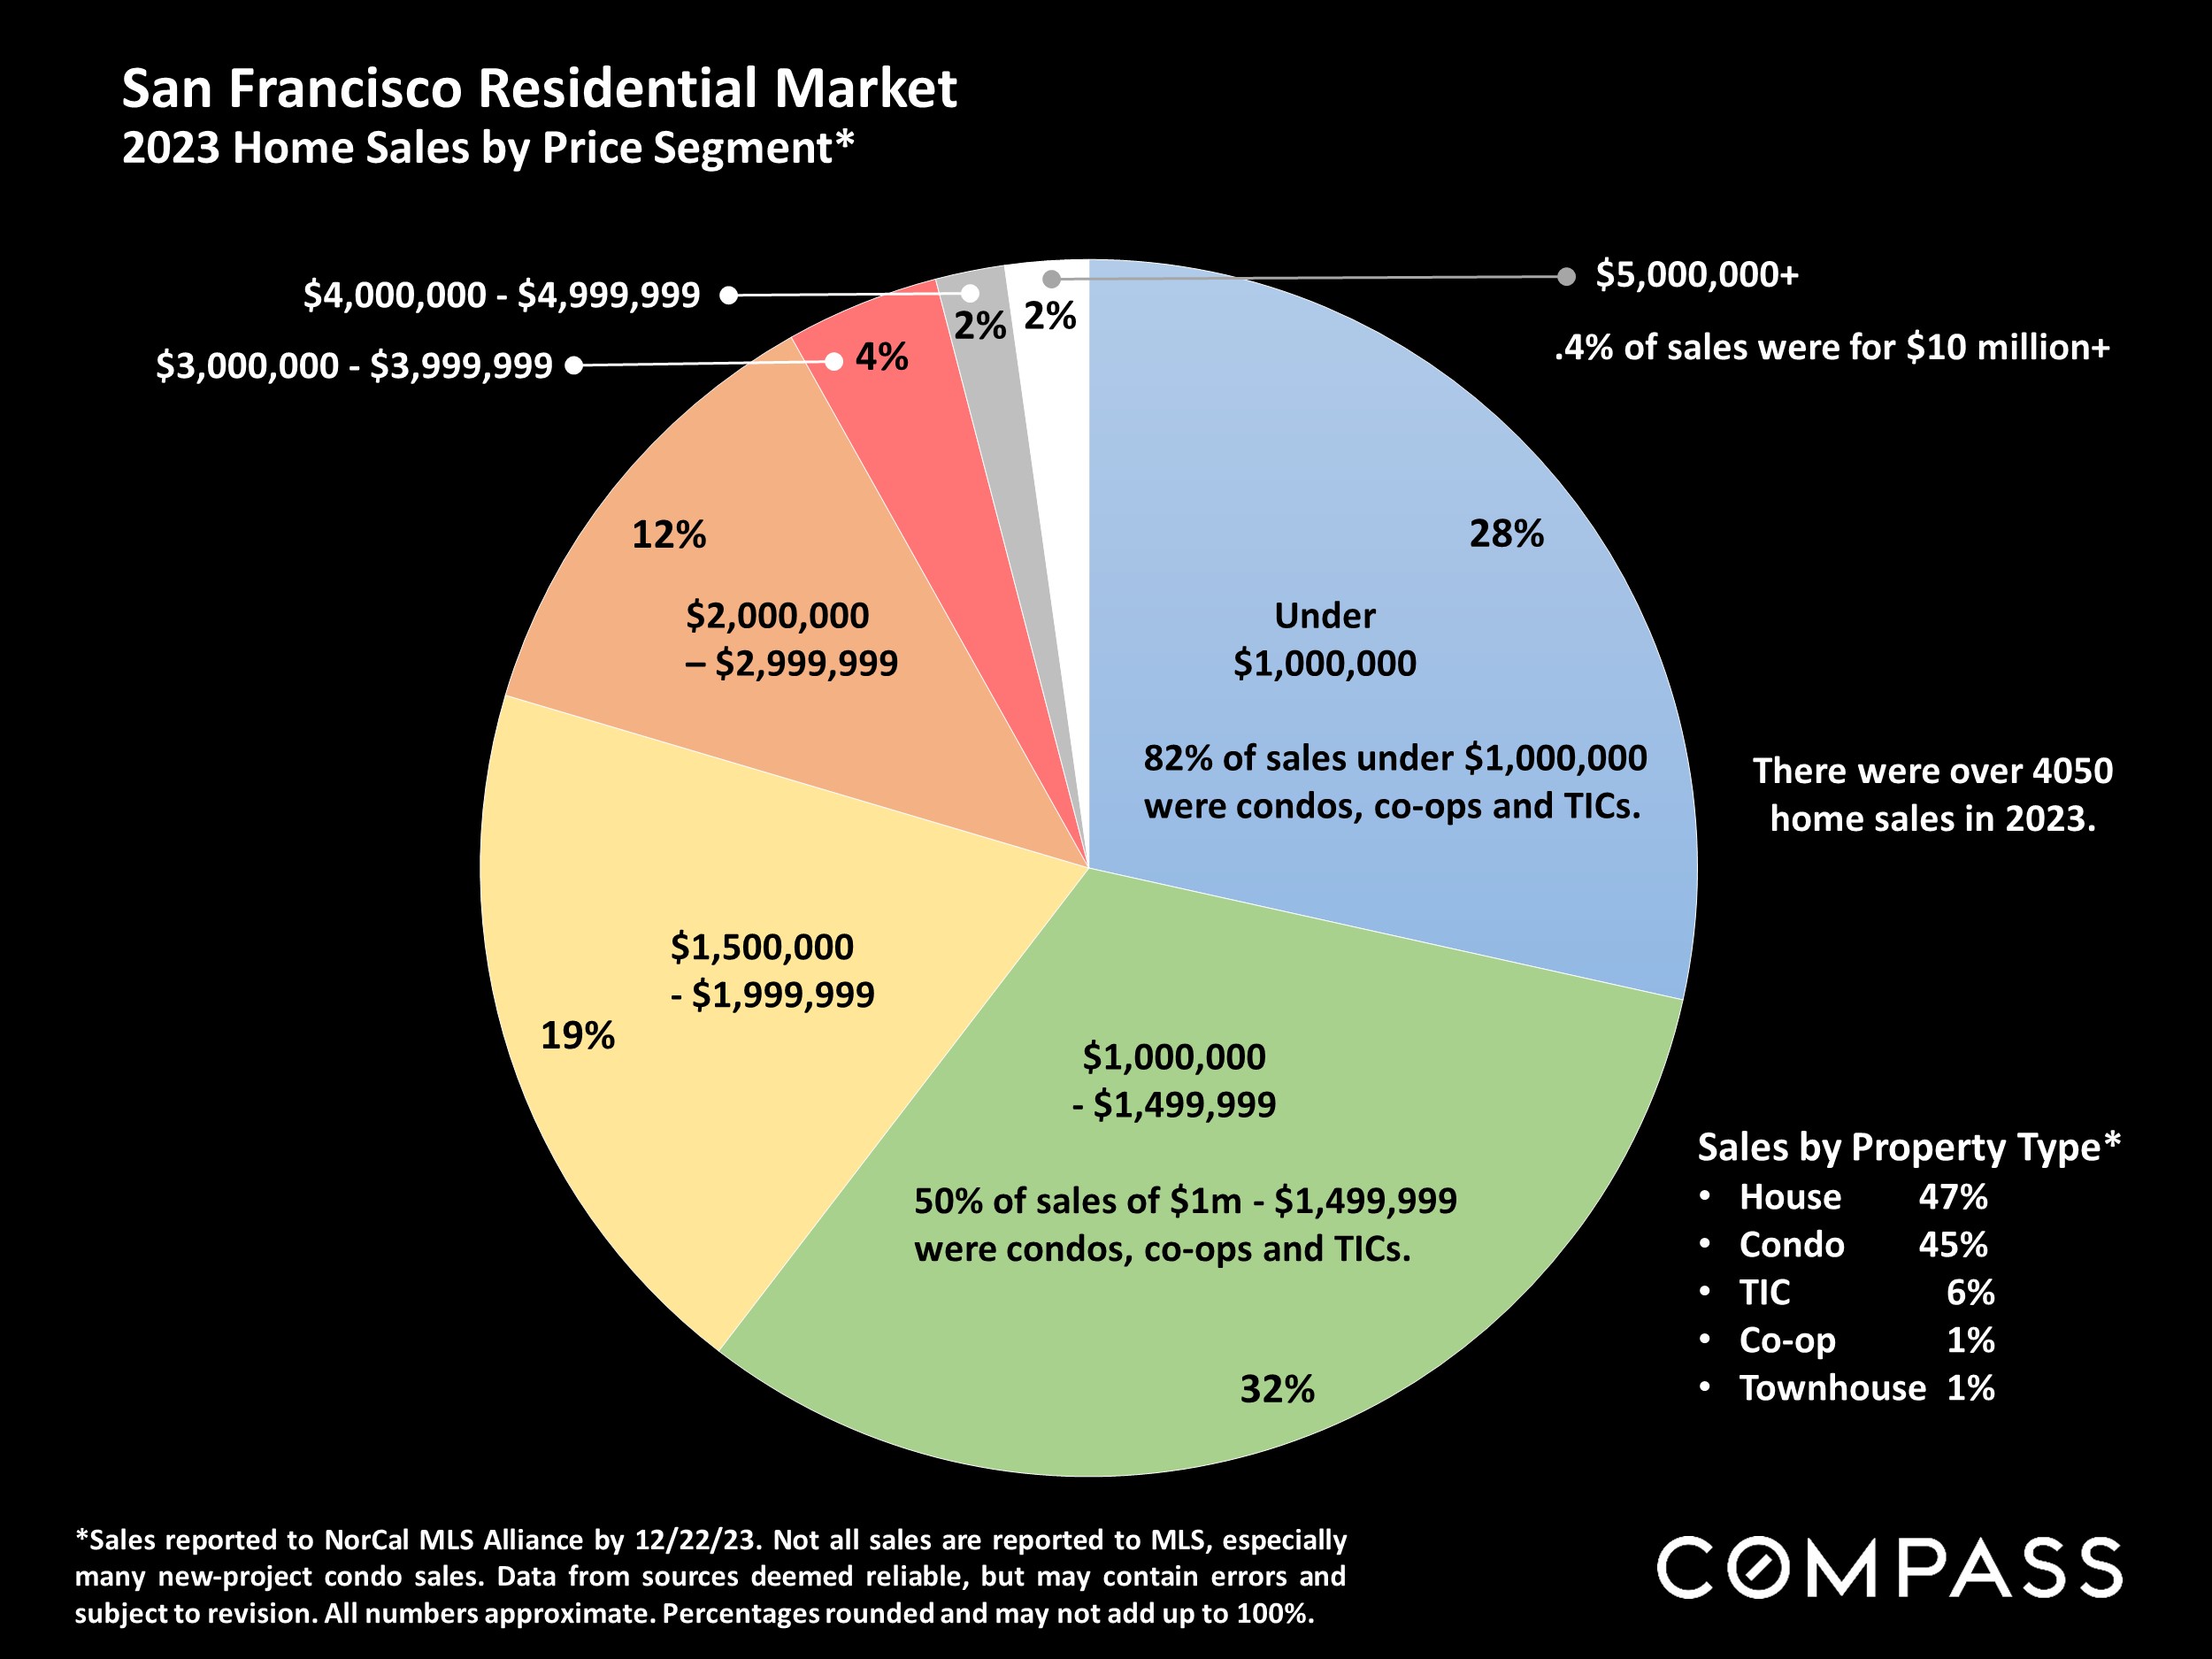 San Francisco Residential Market 2023 Home Sales by Price Segment*